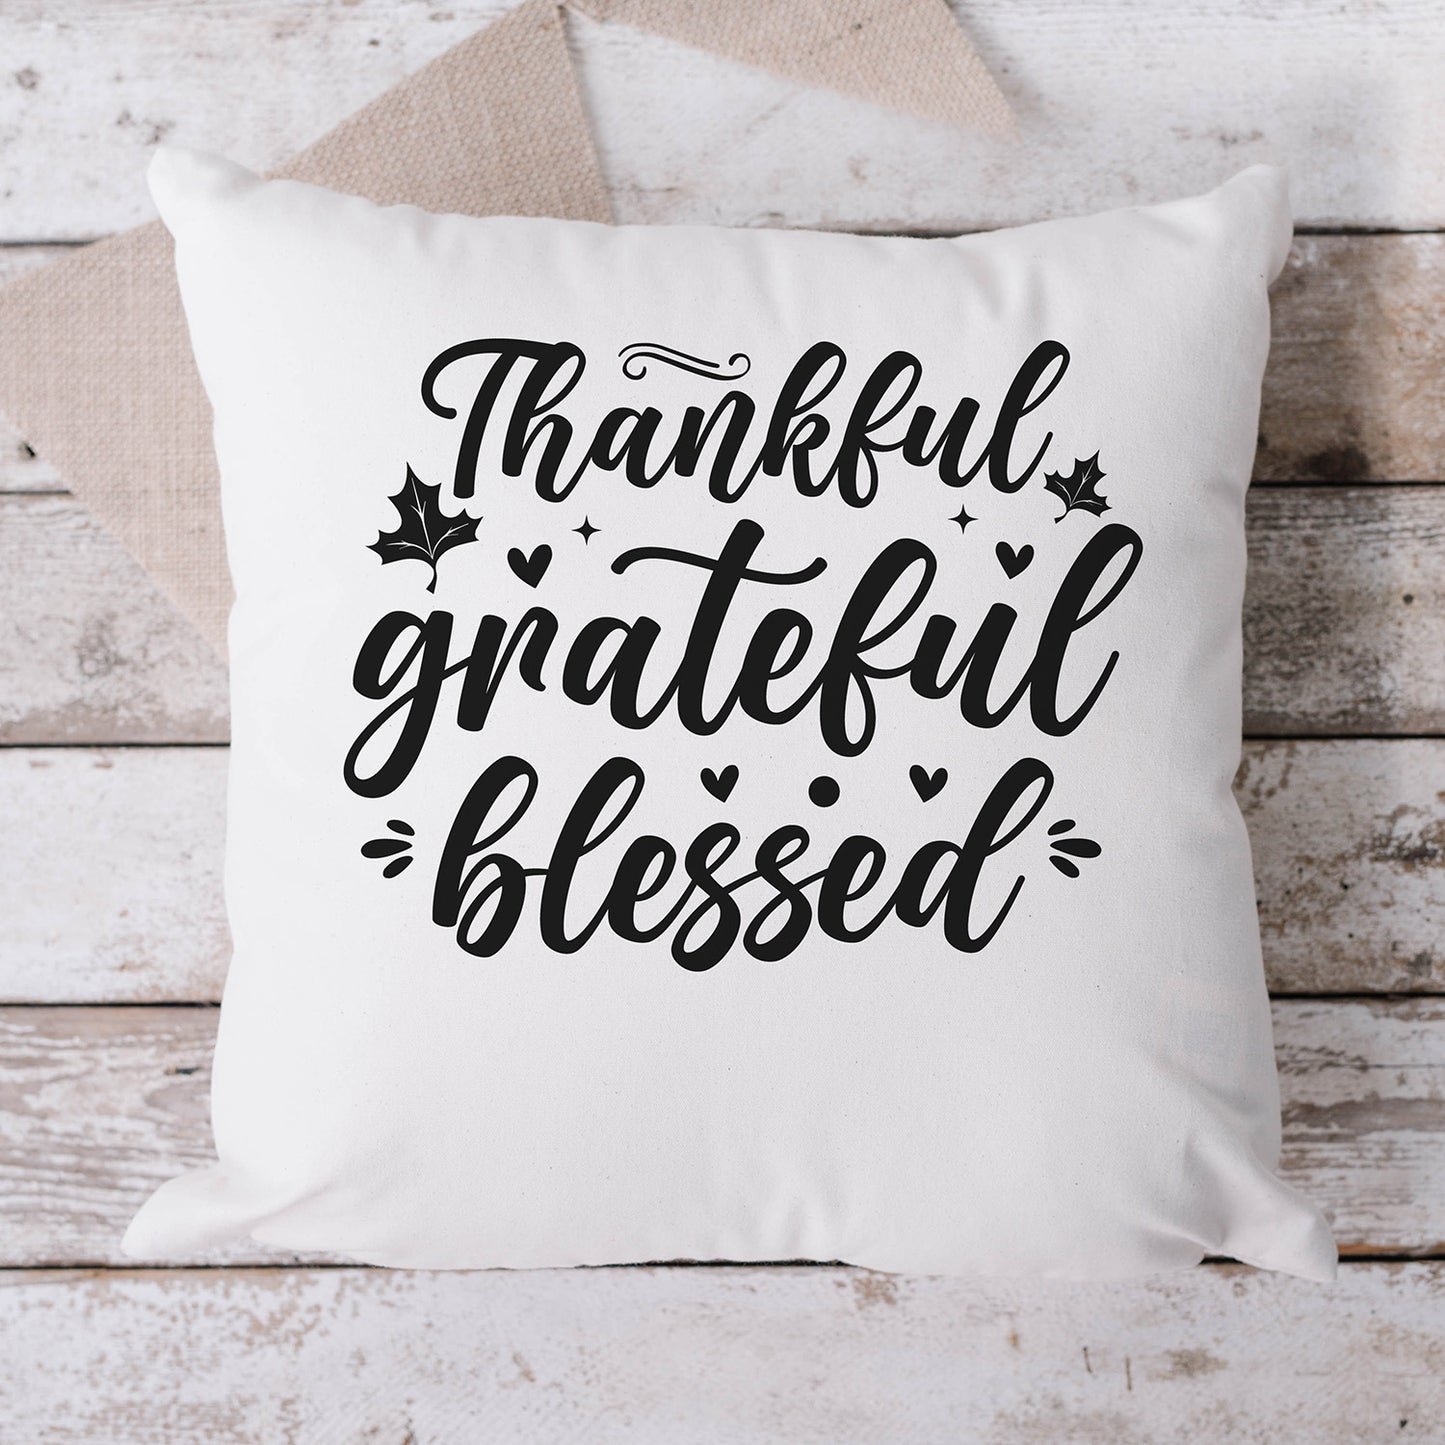 "Thankful Grateful Blessed" Graphic